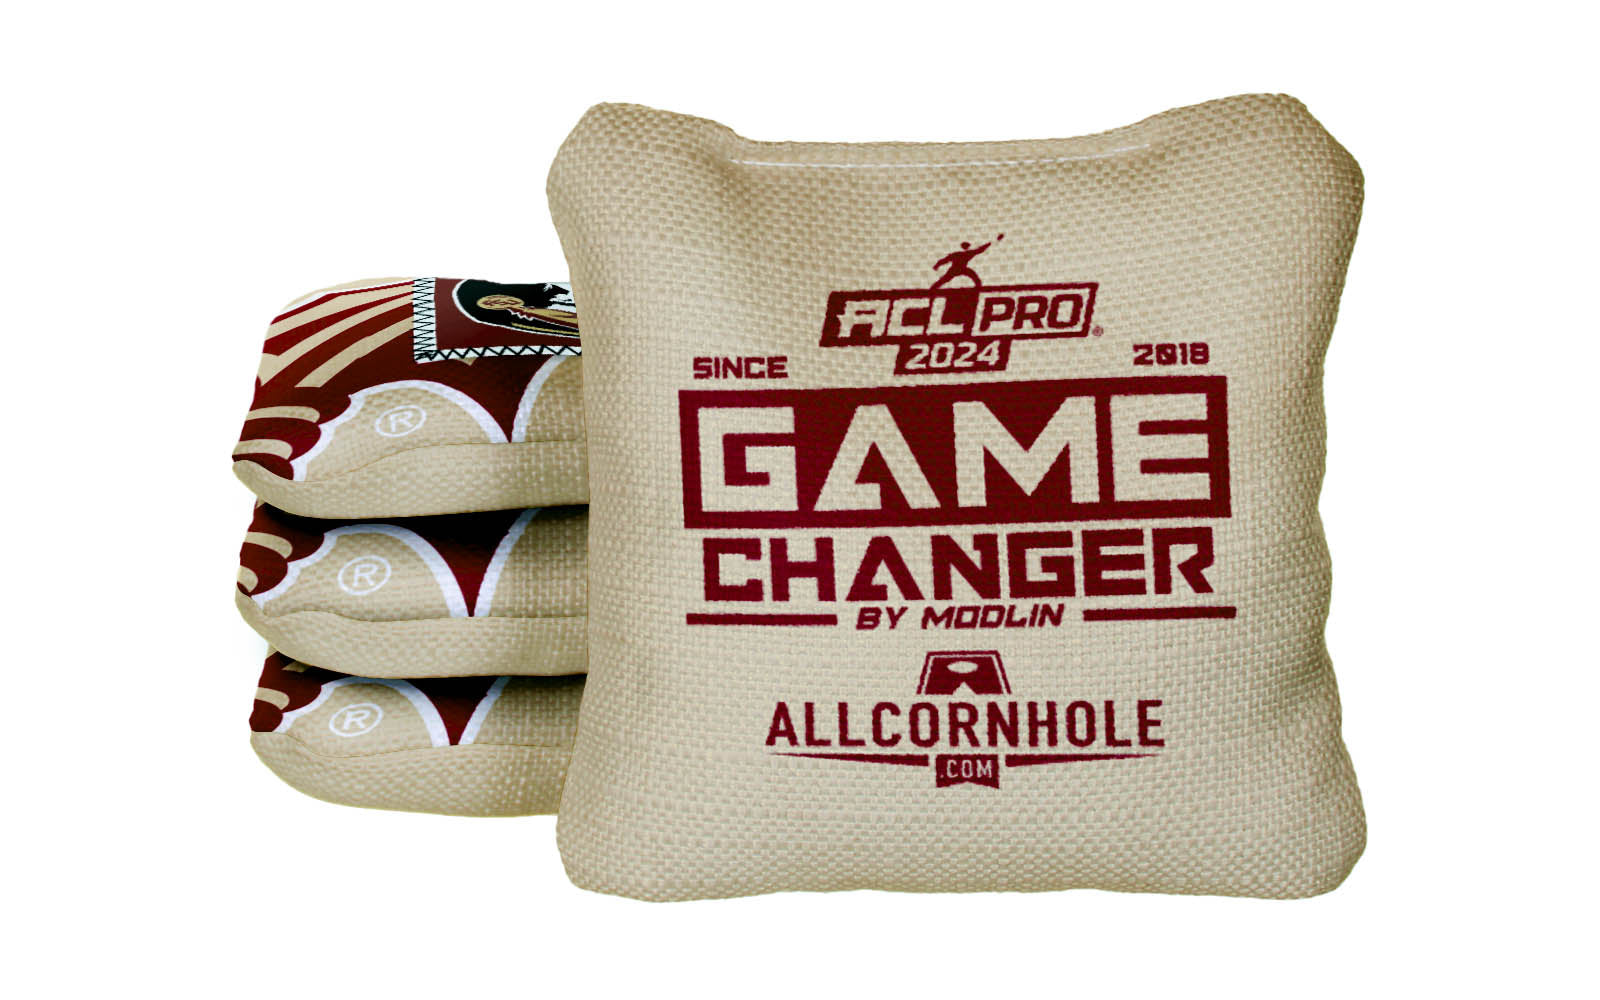 Officially Licensed Collegiate Cornhole Bags - AllCornhole Game Changers - Set of 4 - Florida State University